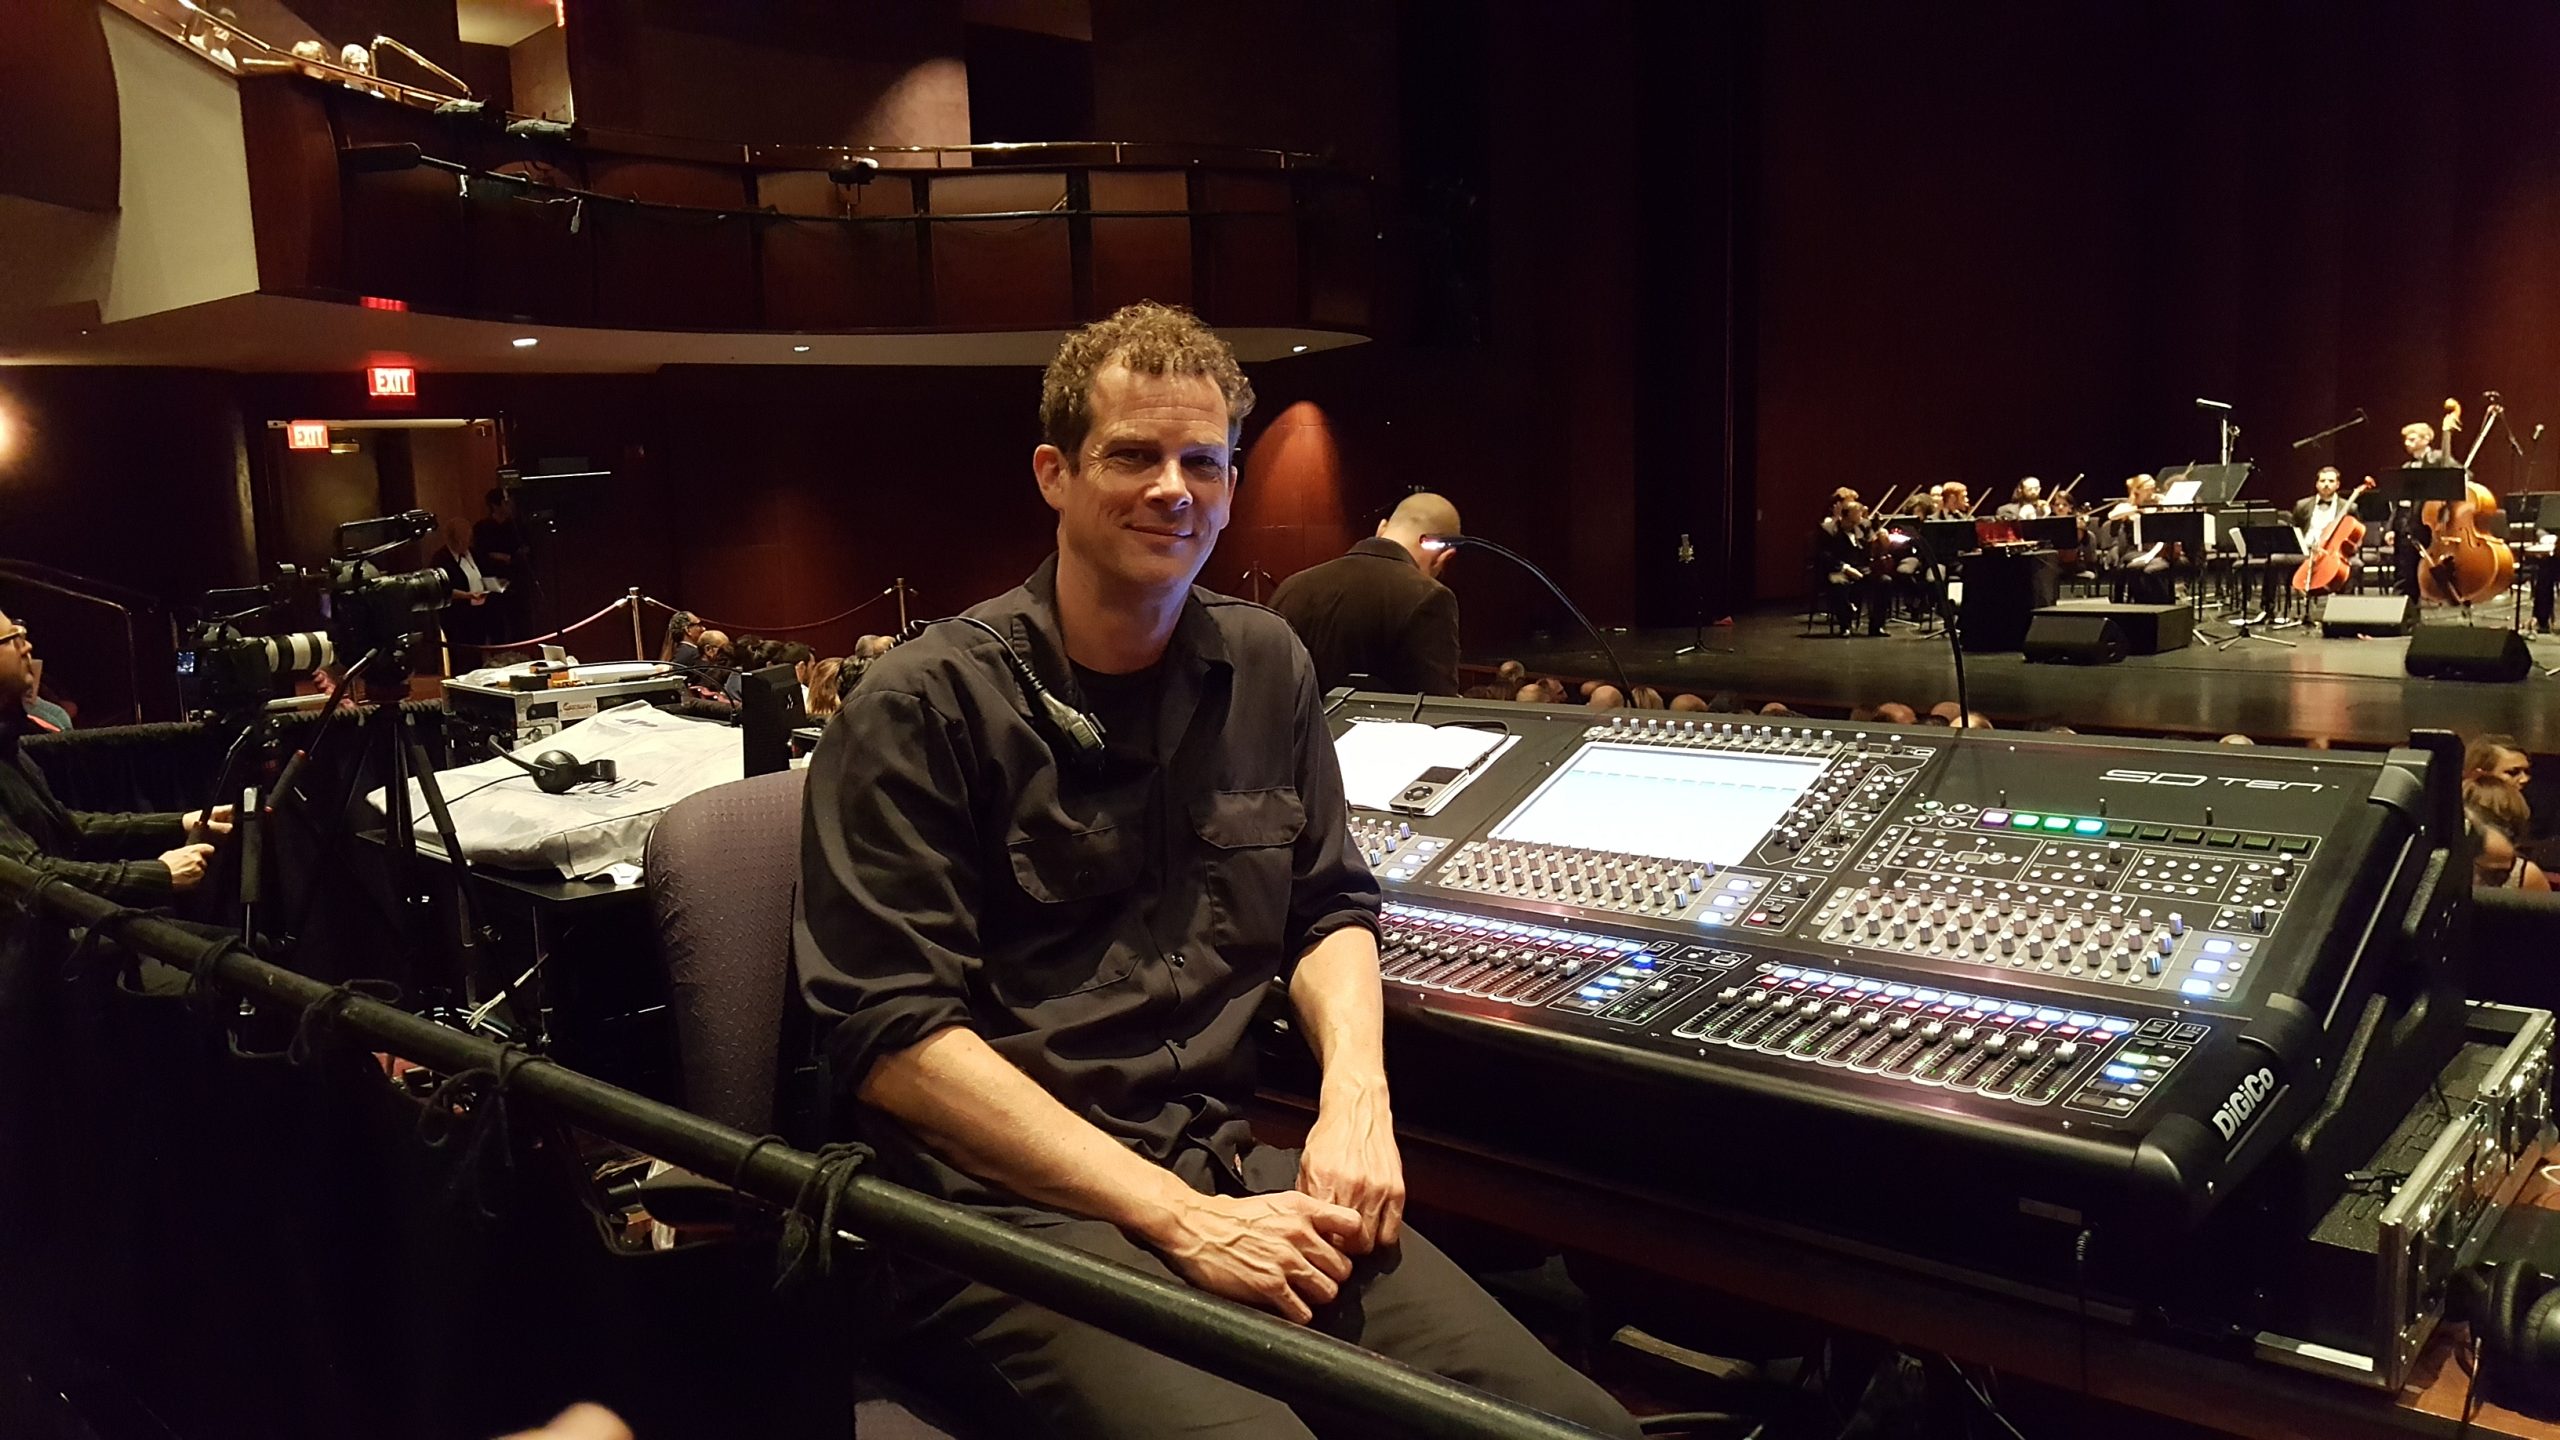 A man sits in front of mixing console in a concert hall.